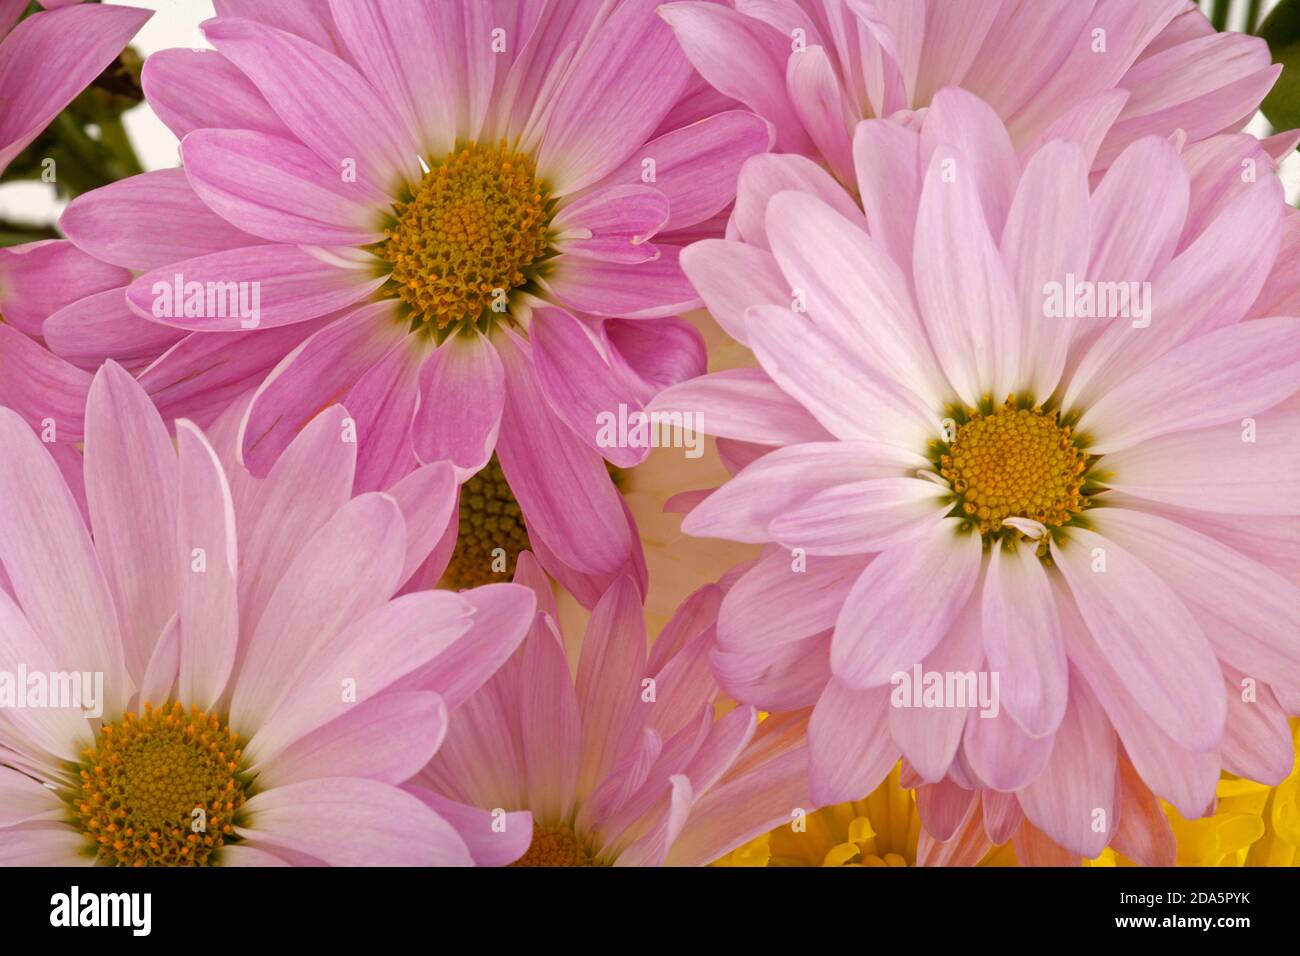 A background of beautiful lavender Chrysanthemum flowers blooming in the spring Stock Photo